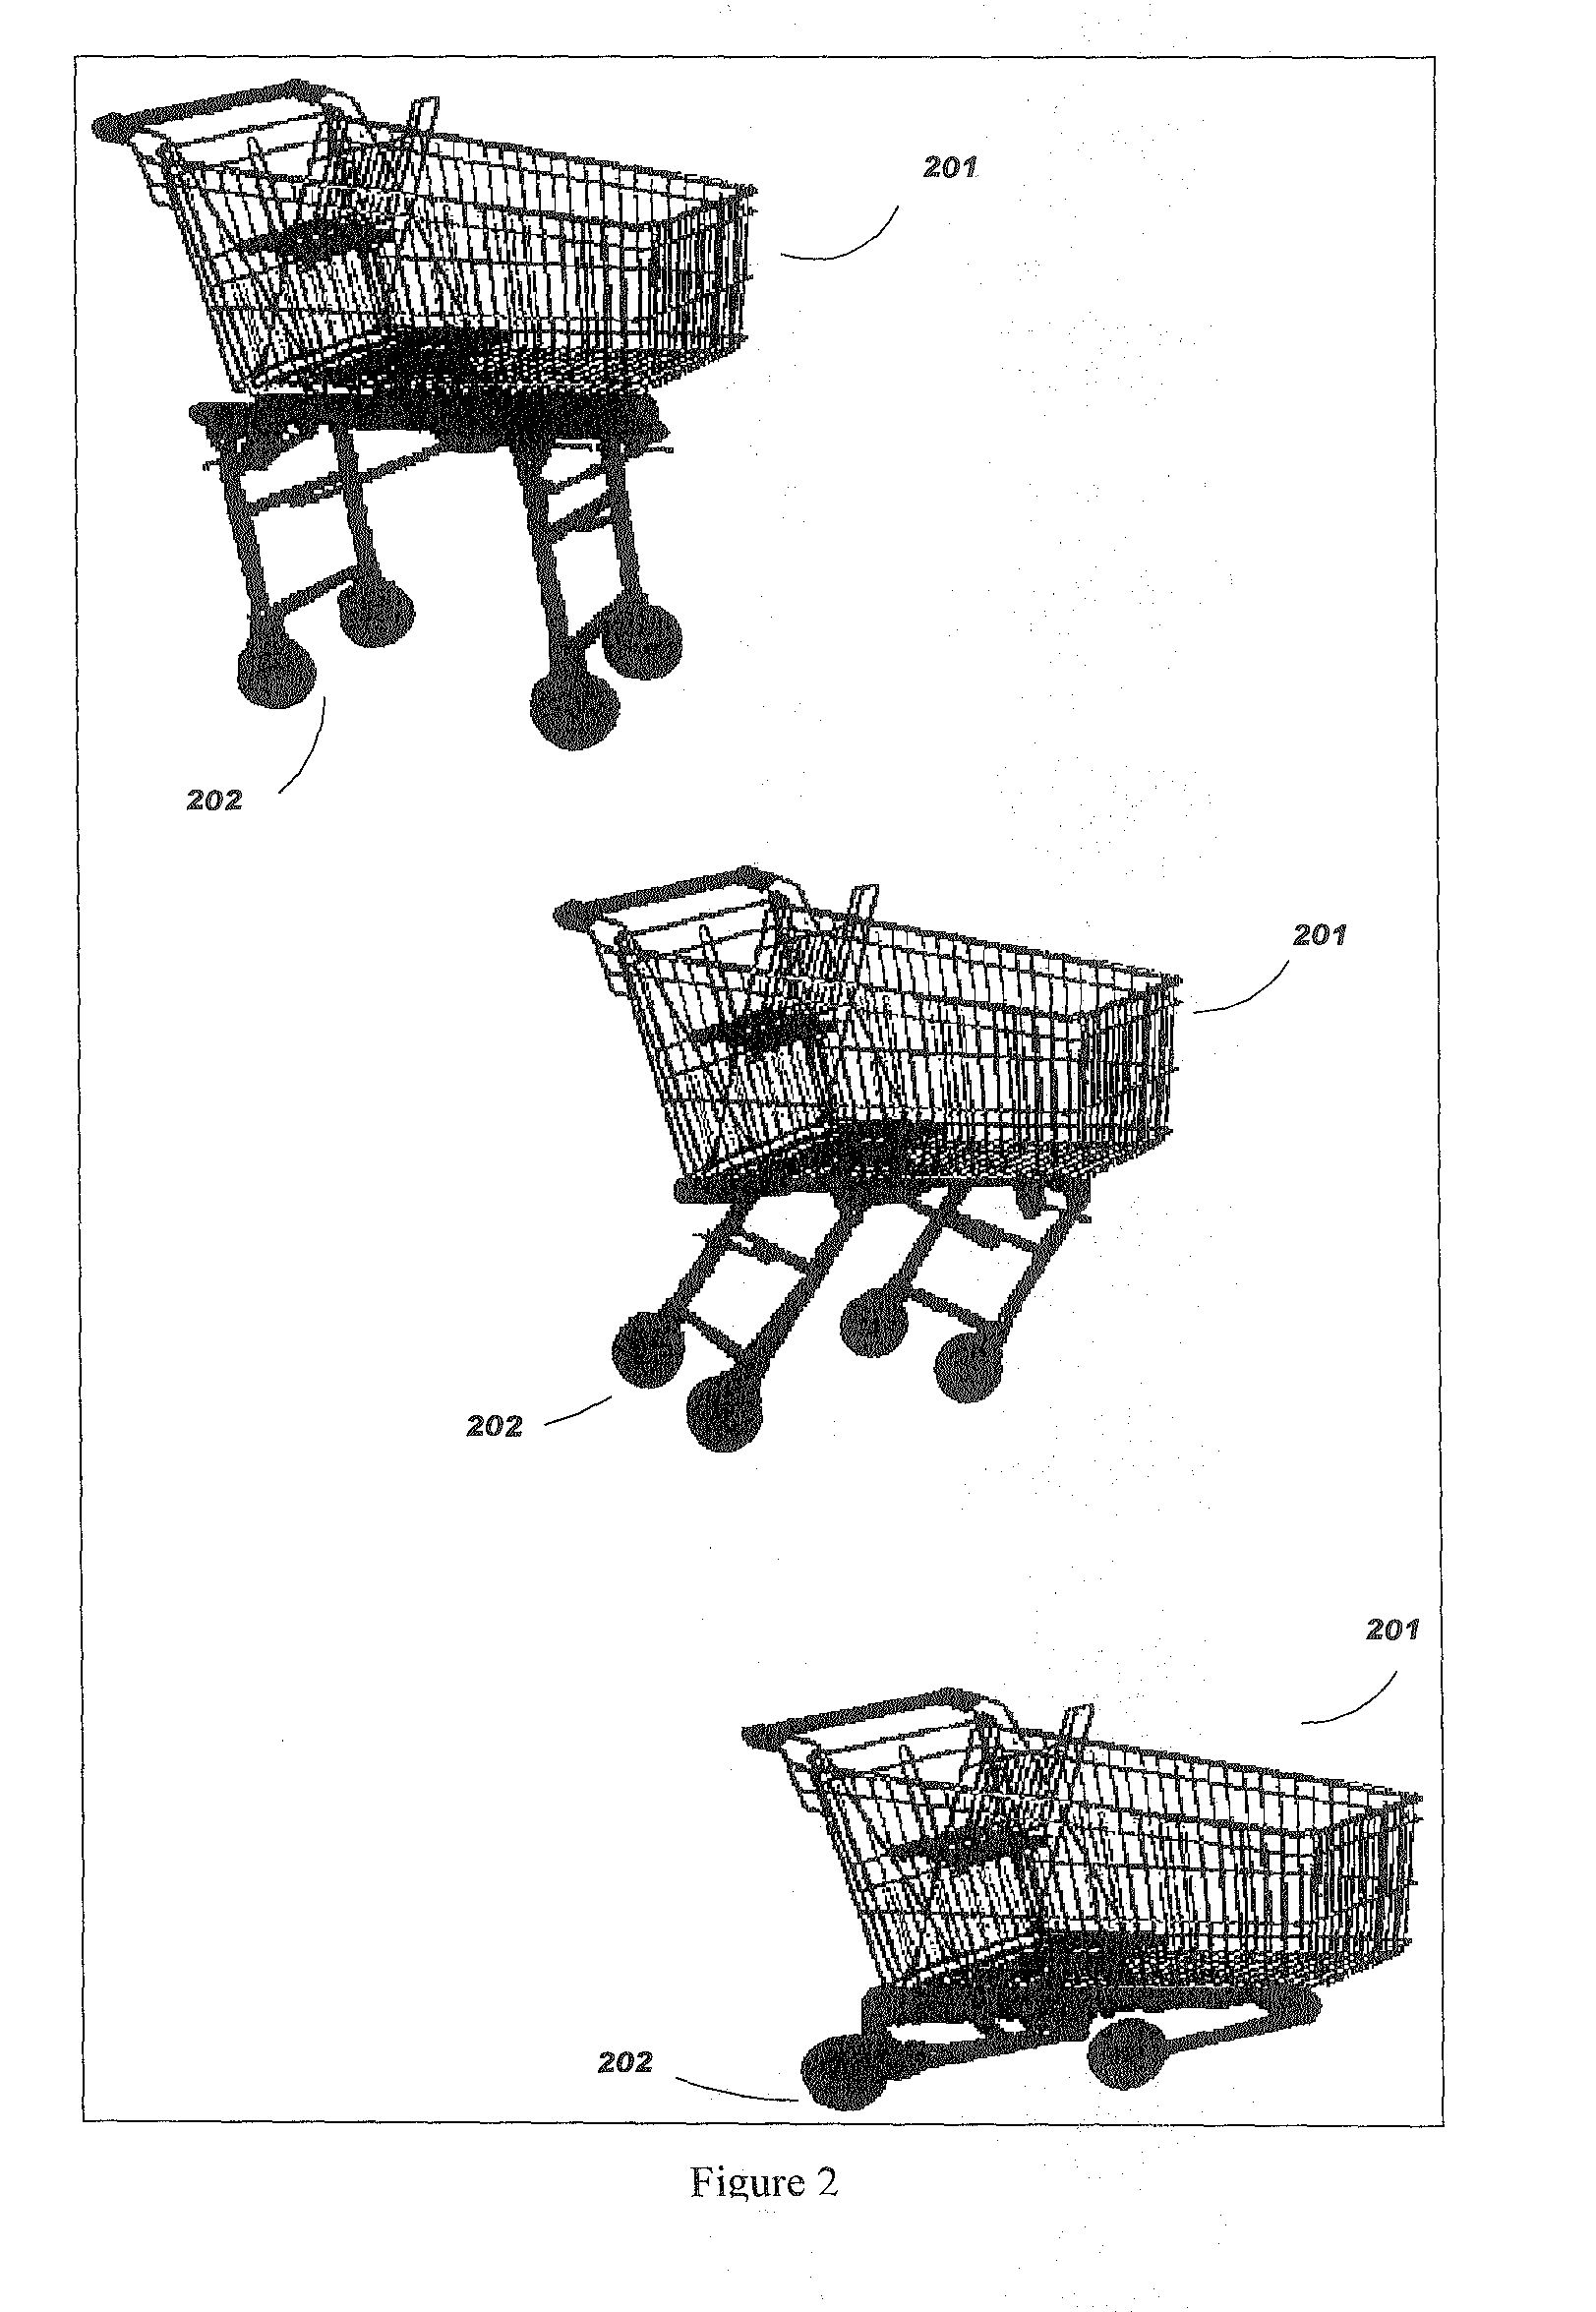 System For Facilitating The Handling Of Goods Based On Containers Equipped With An RFID Tag